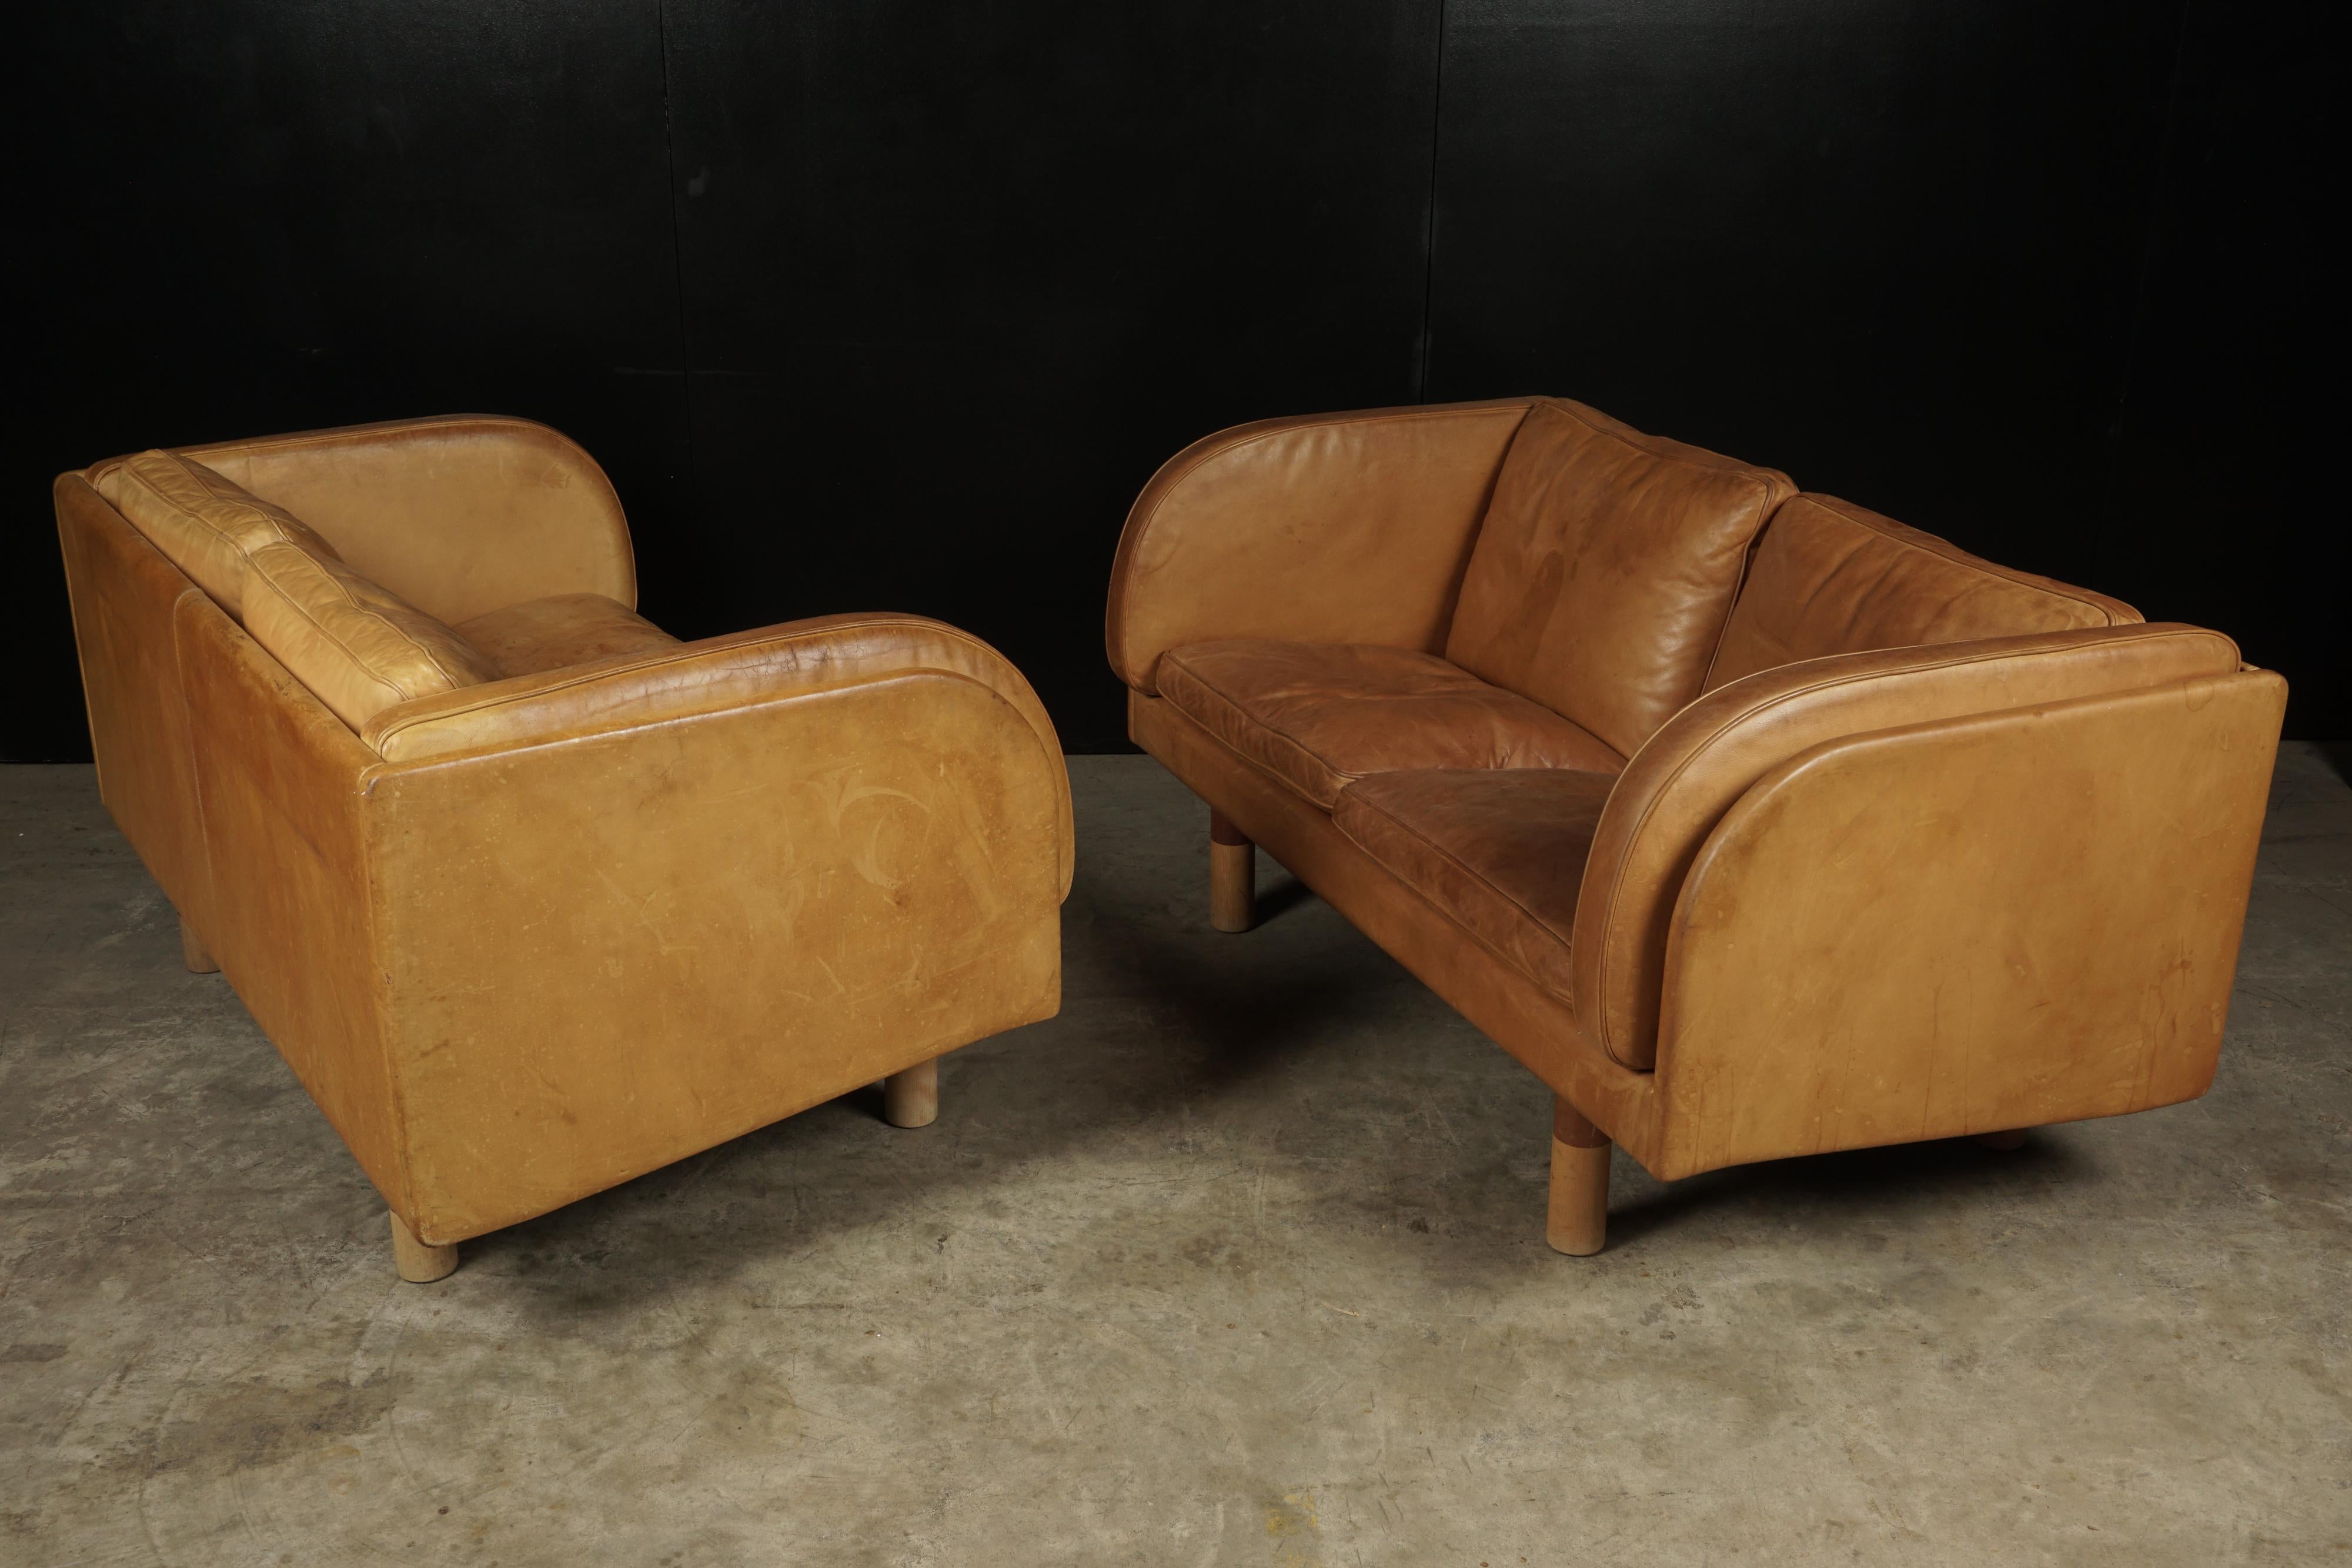 Rare pair of two seat sofas in cognac leather designed by Jørgen Gammelgaard, circa 1980. Superb quality and patina.